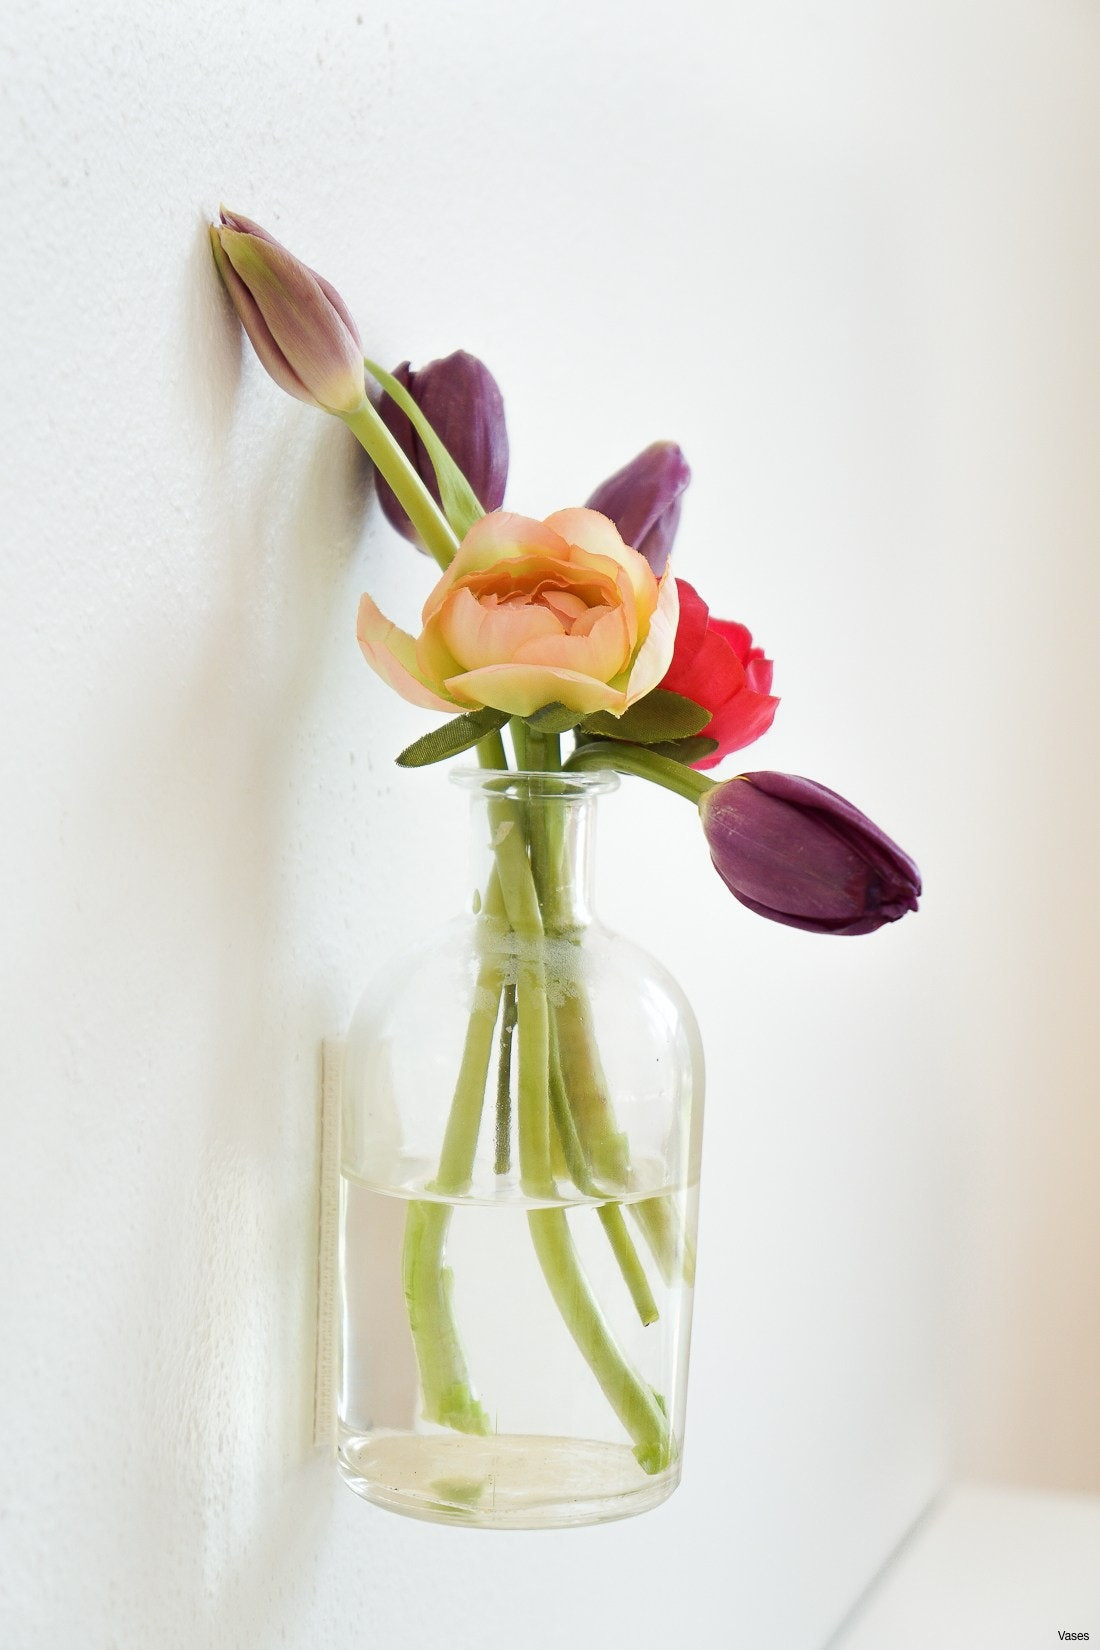 pictures of roses in a vase of small white flowers for vases flowers healthy with regard to il fullxfull l7e9h vases wall flower vase zoomi 0d decor inspiration scheme beautiful flower bouquet